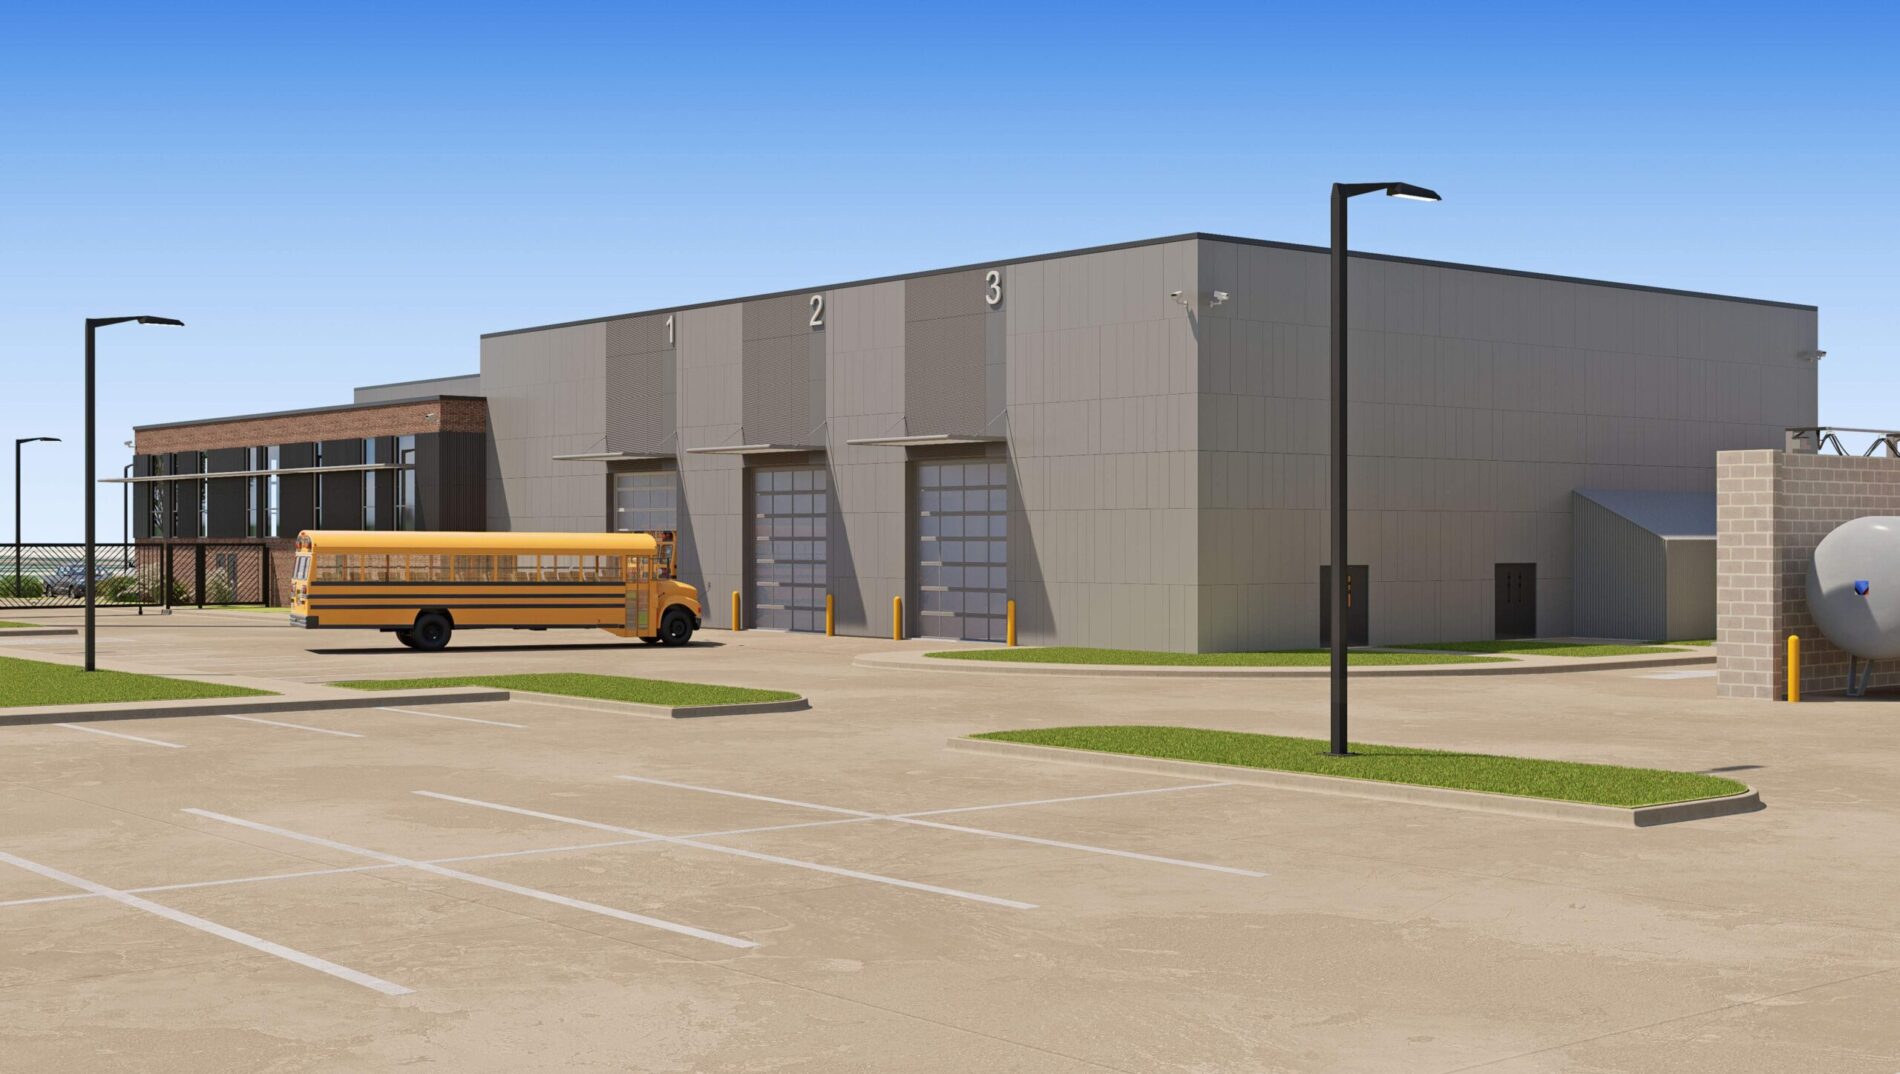 A rendering of the student transportation and logistics center at Irving ISD